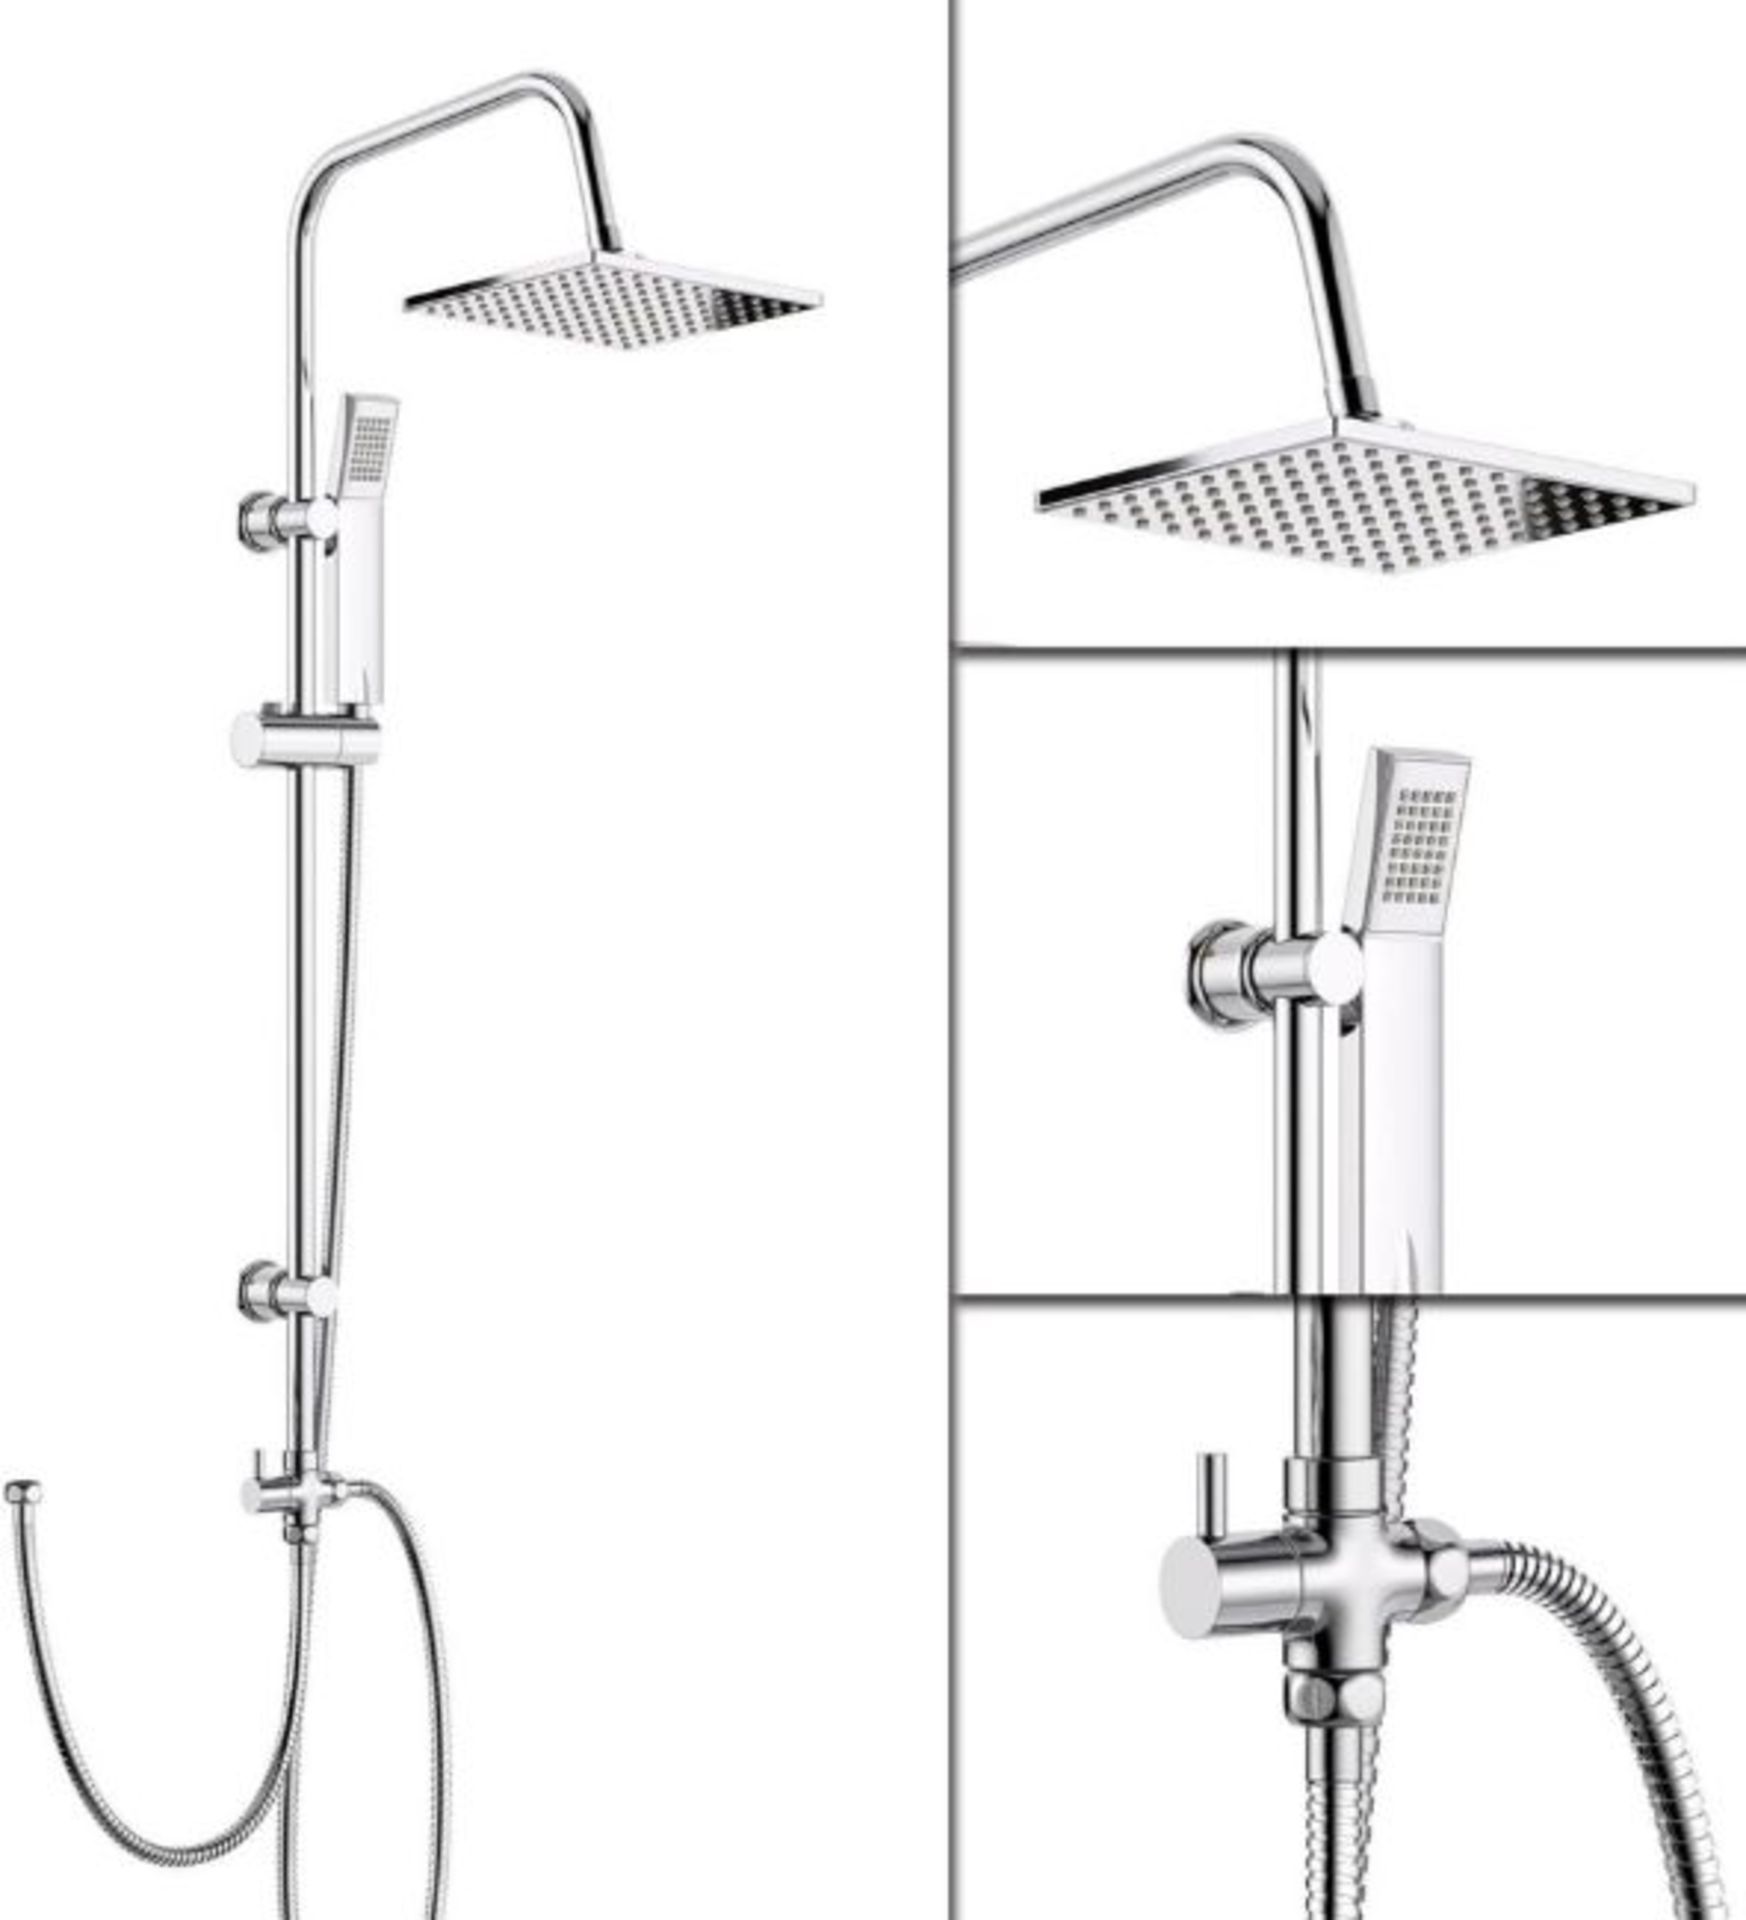 New & Boxed Round Concealed Thermostatic Mixer Shower Kit & Large Head, Matte Black. RRP £499... - Image 2 of 2